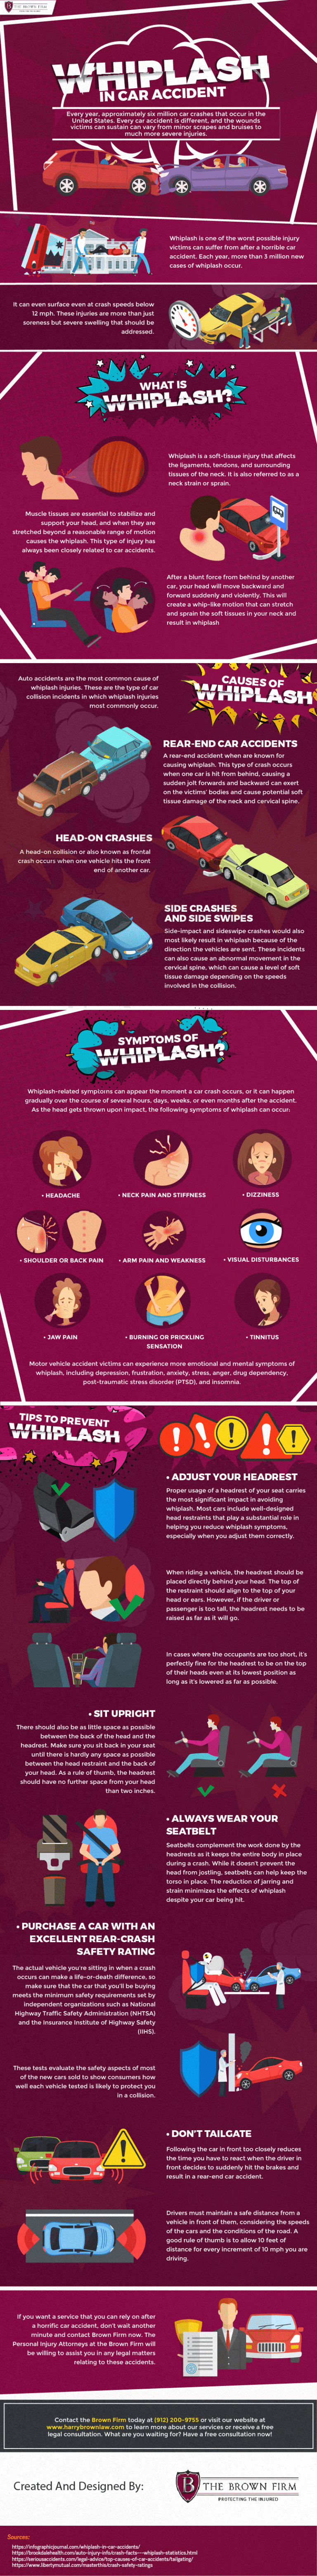 whiplash injury after a car accident